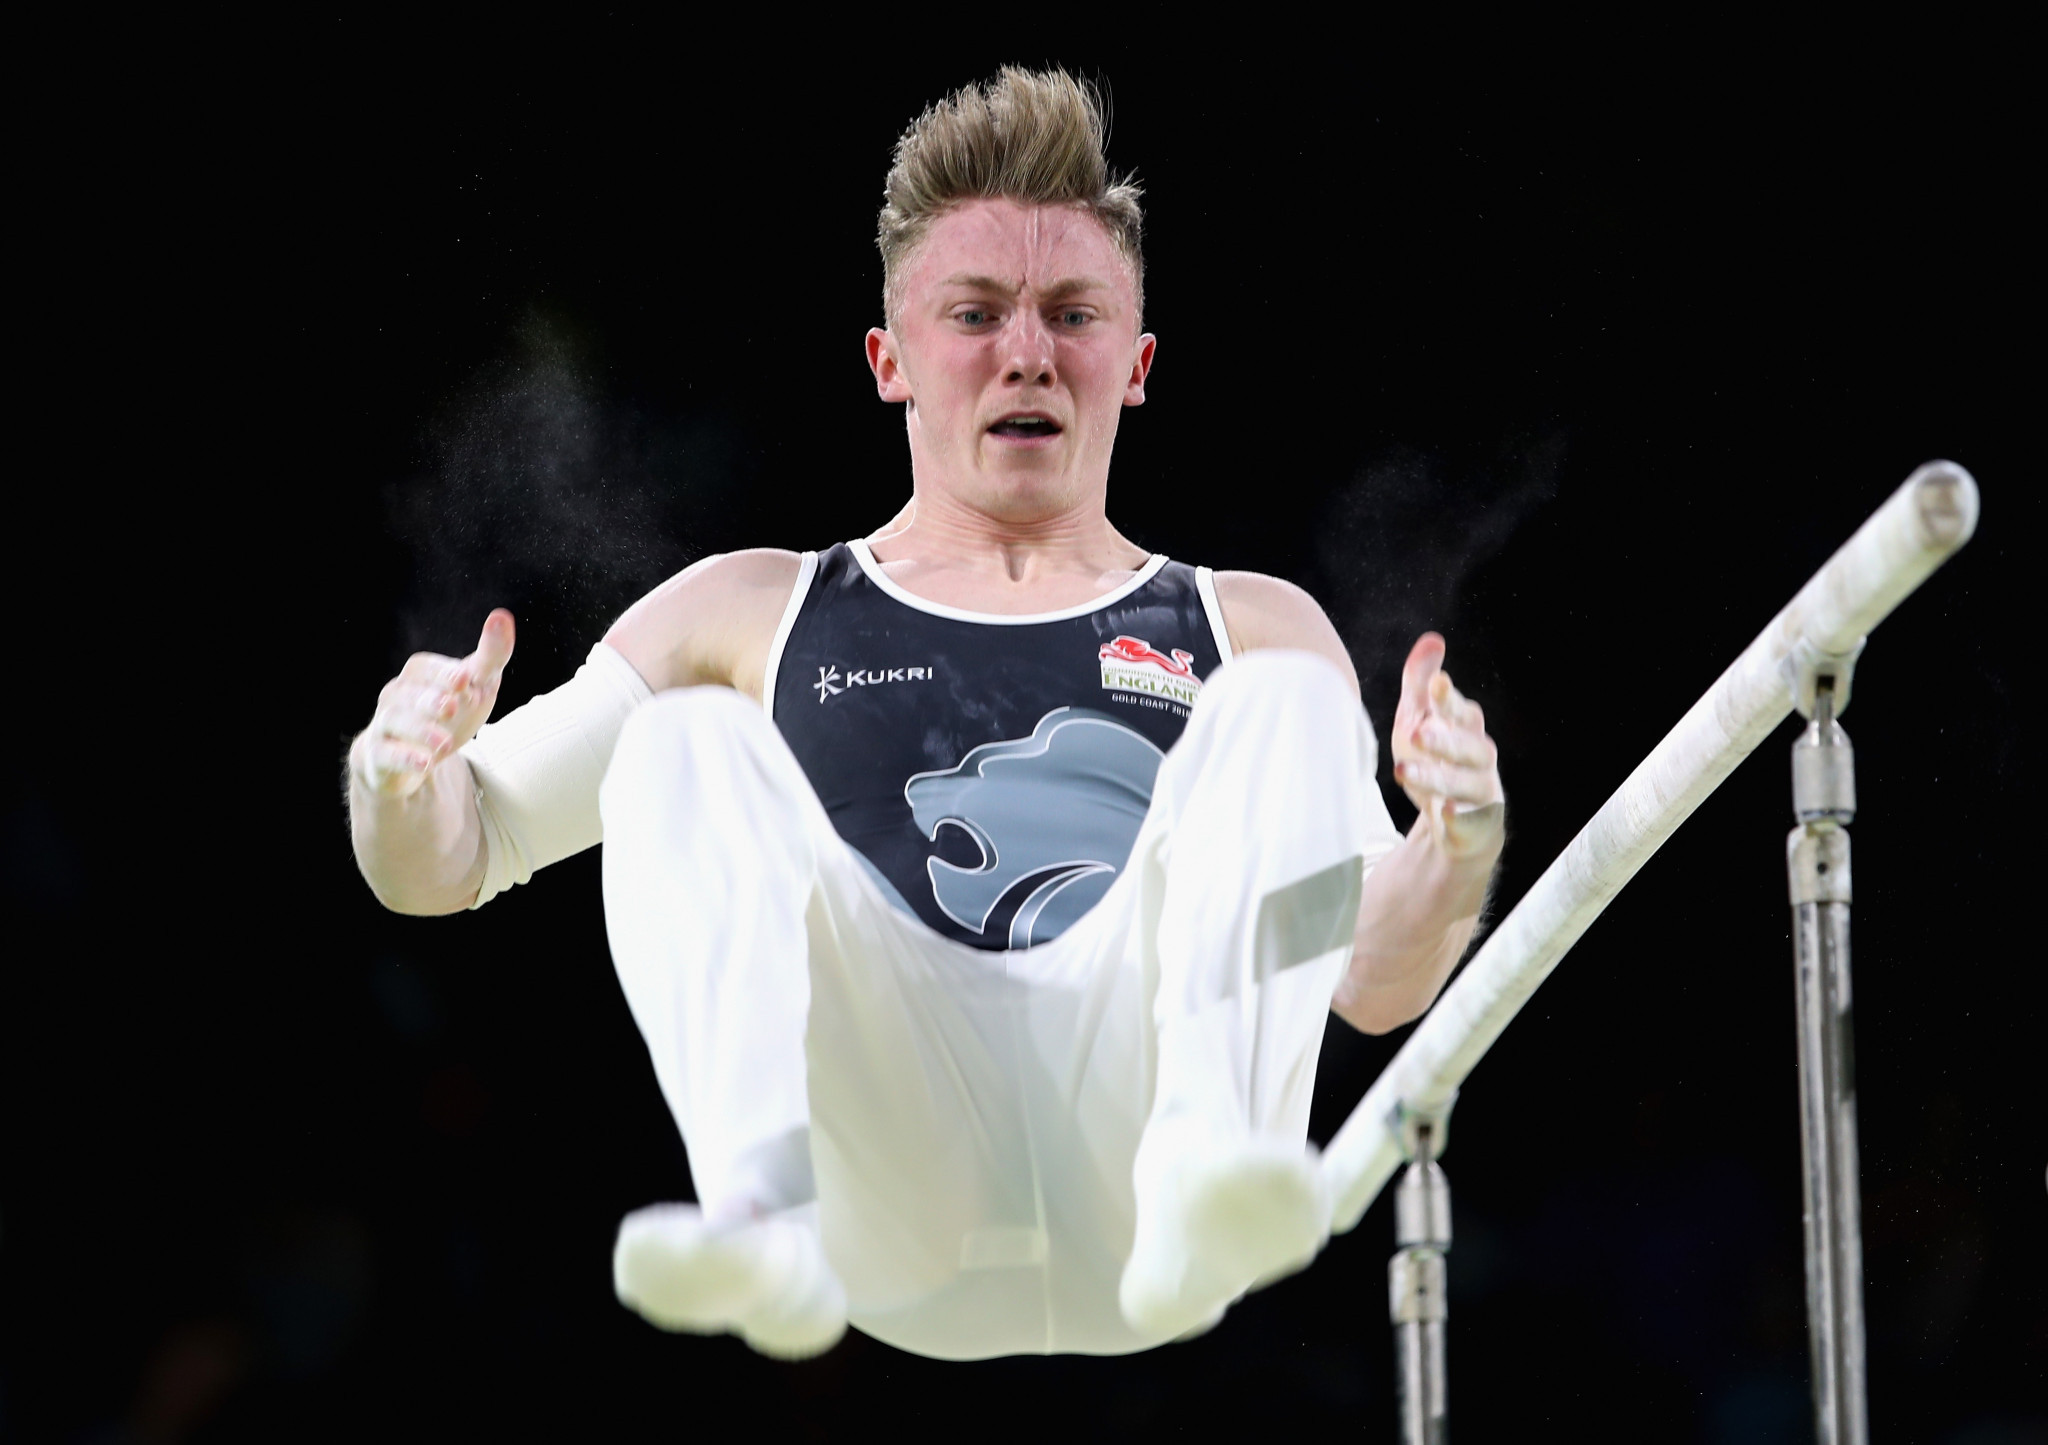 Olympic bronze medallist Nile Wilson is the latest British gymnast to speak out about allegations of abuse ©Getty Images